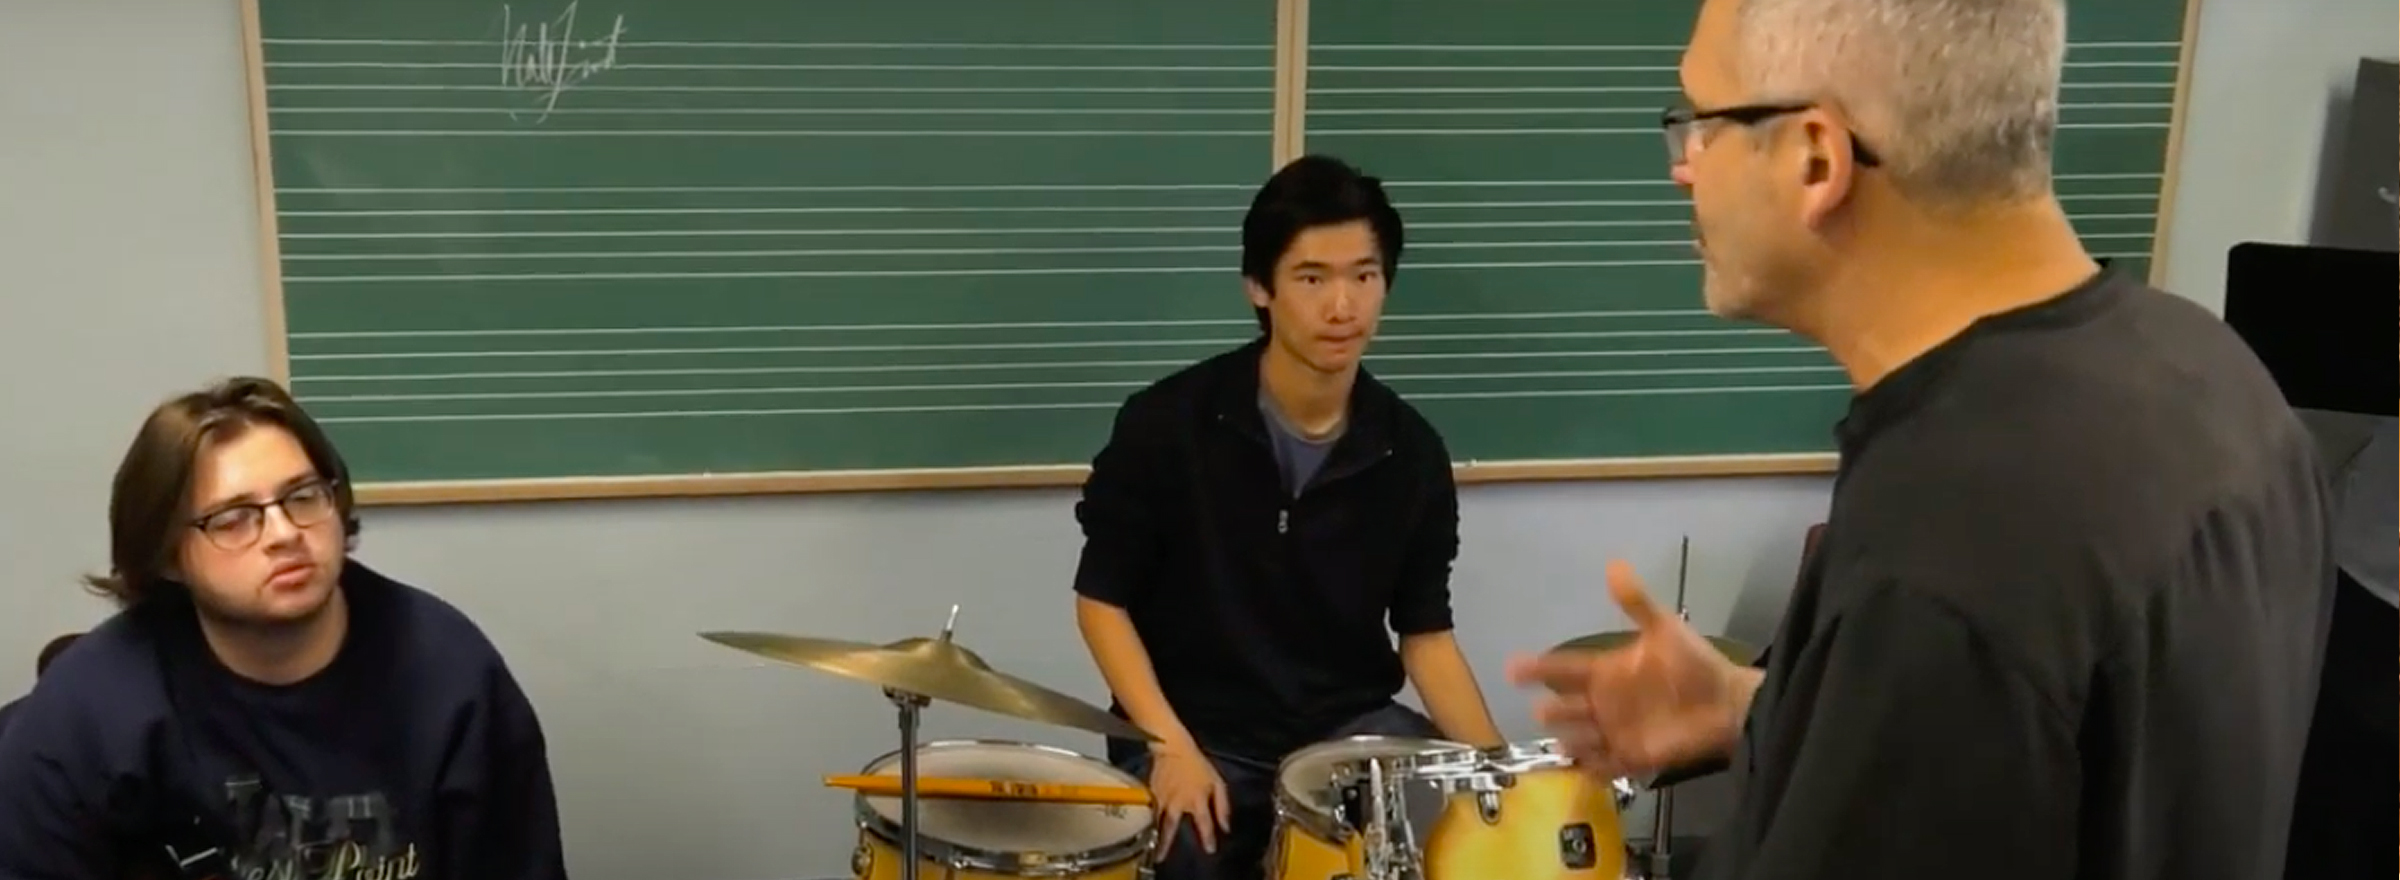 students in a classroom with a drum set